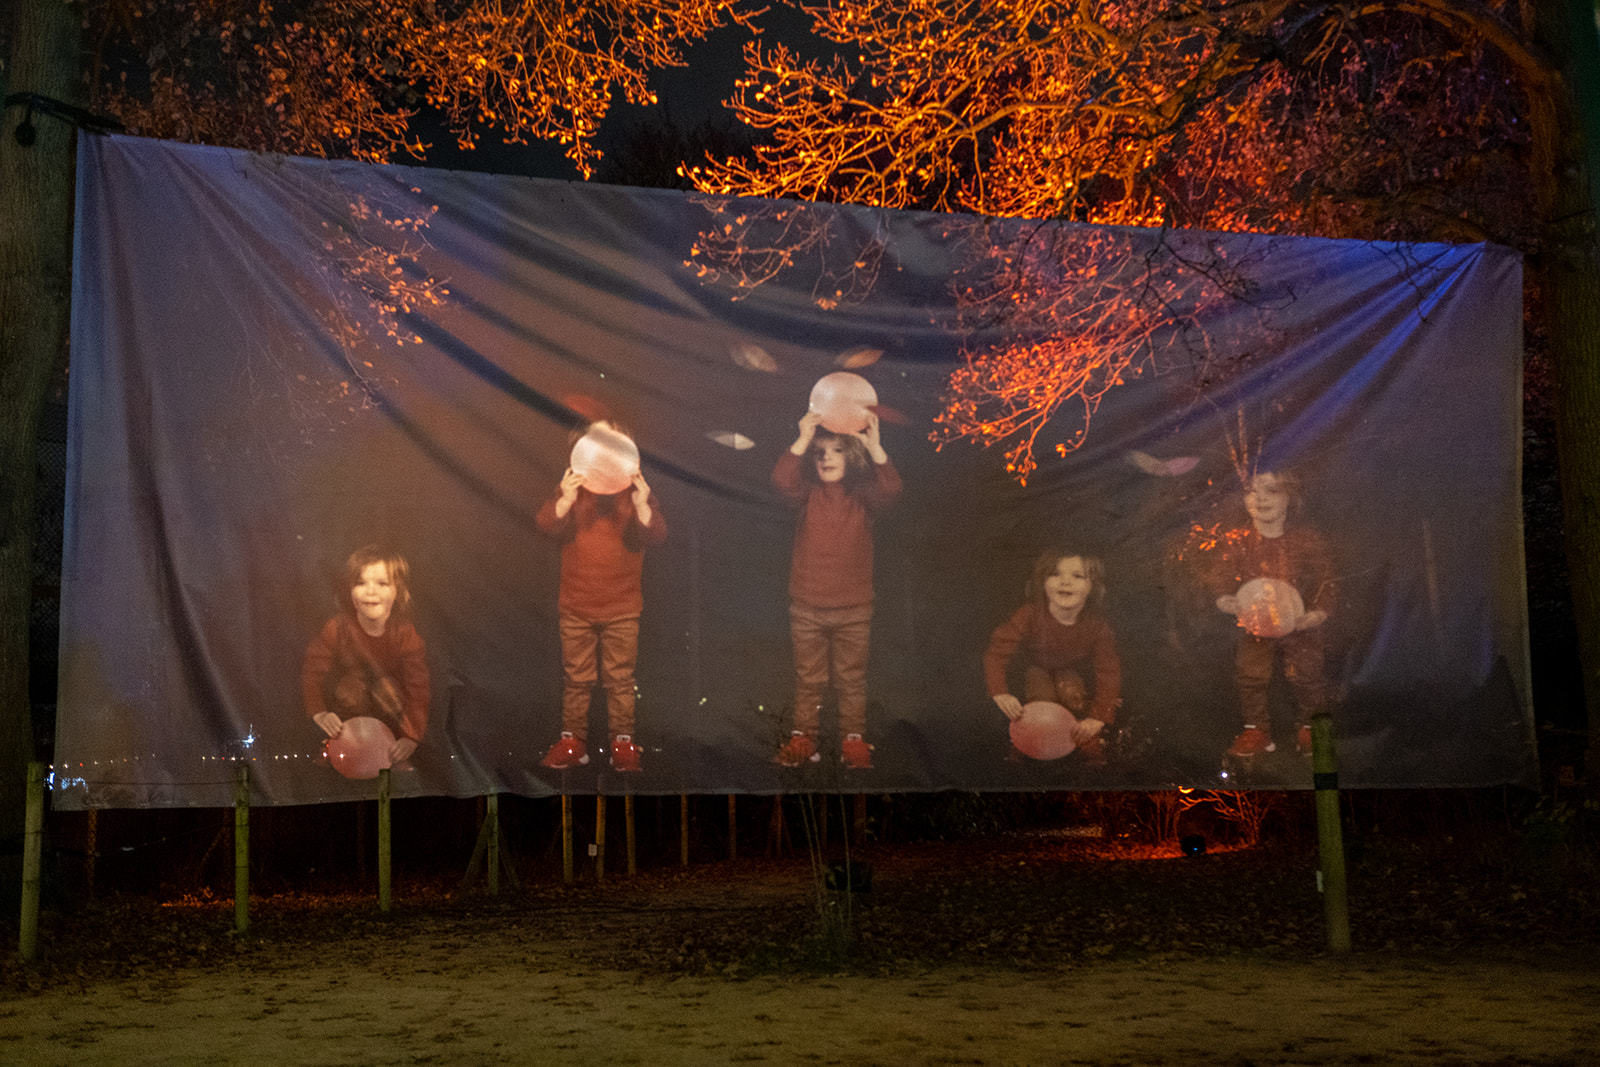 A huge piece of fabric hangs between trees. On it is projected a series of images of a small child holding up a moon.